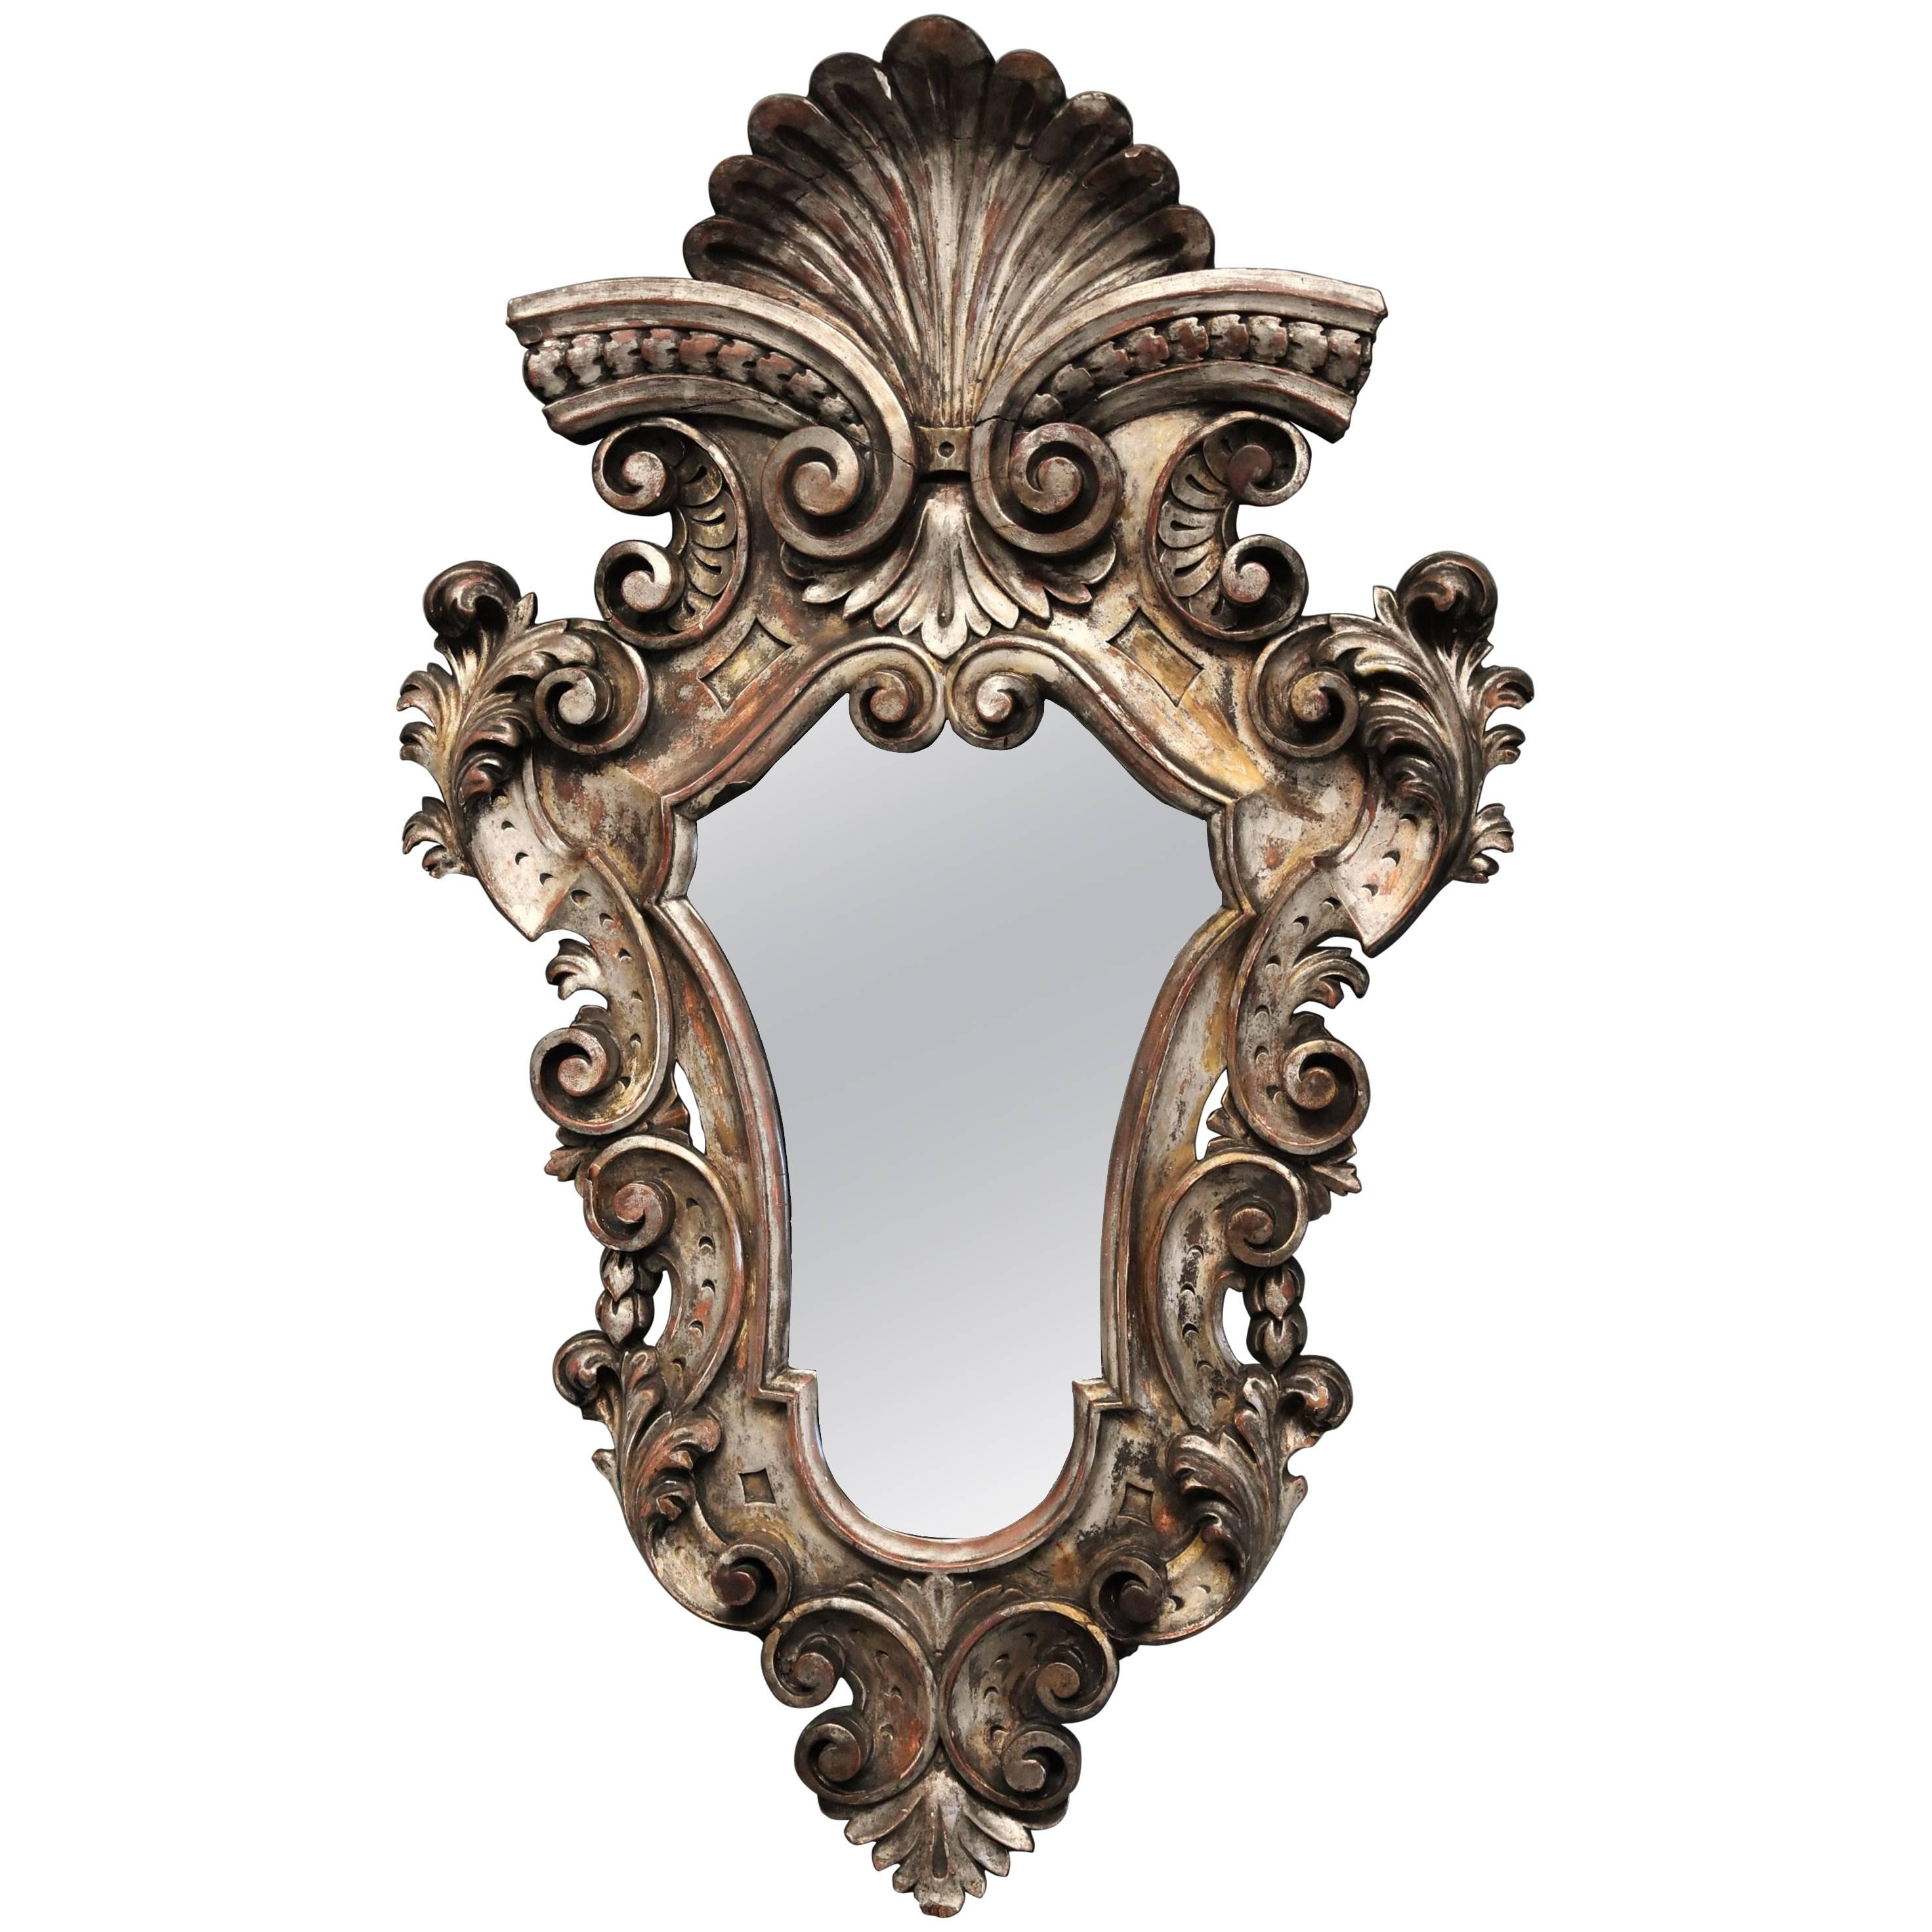 Highly Decorative Late 19th Century Italian Silver Giltwood Rococo Style Mirror